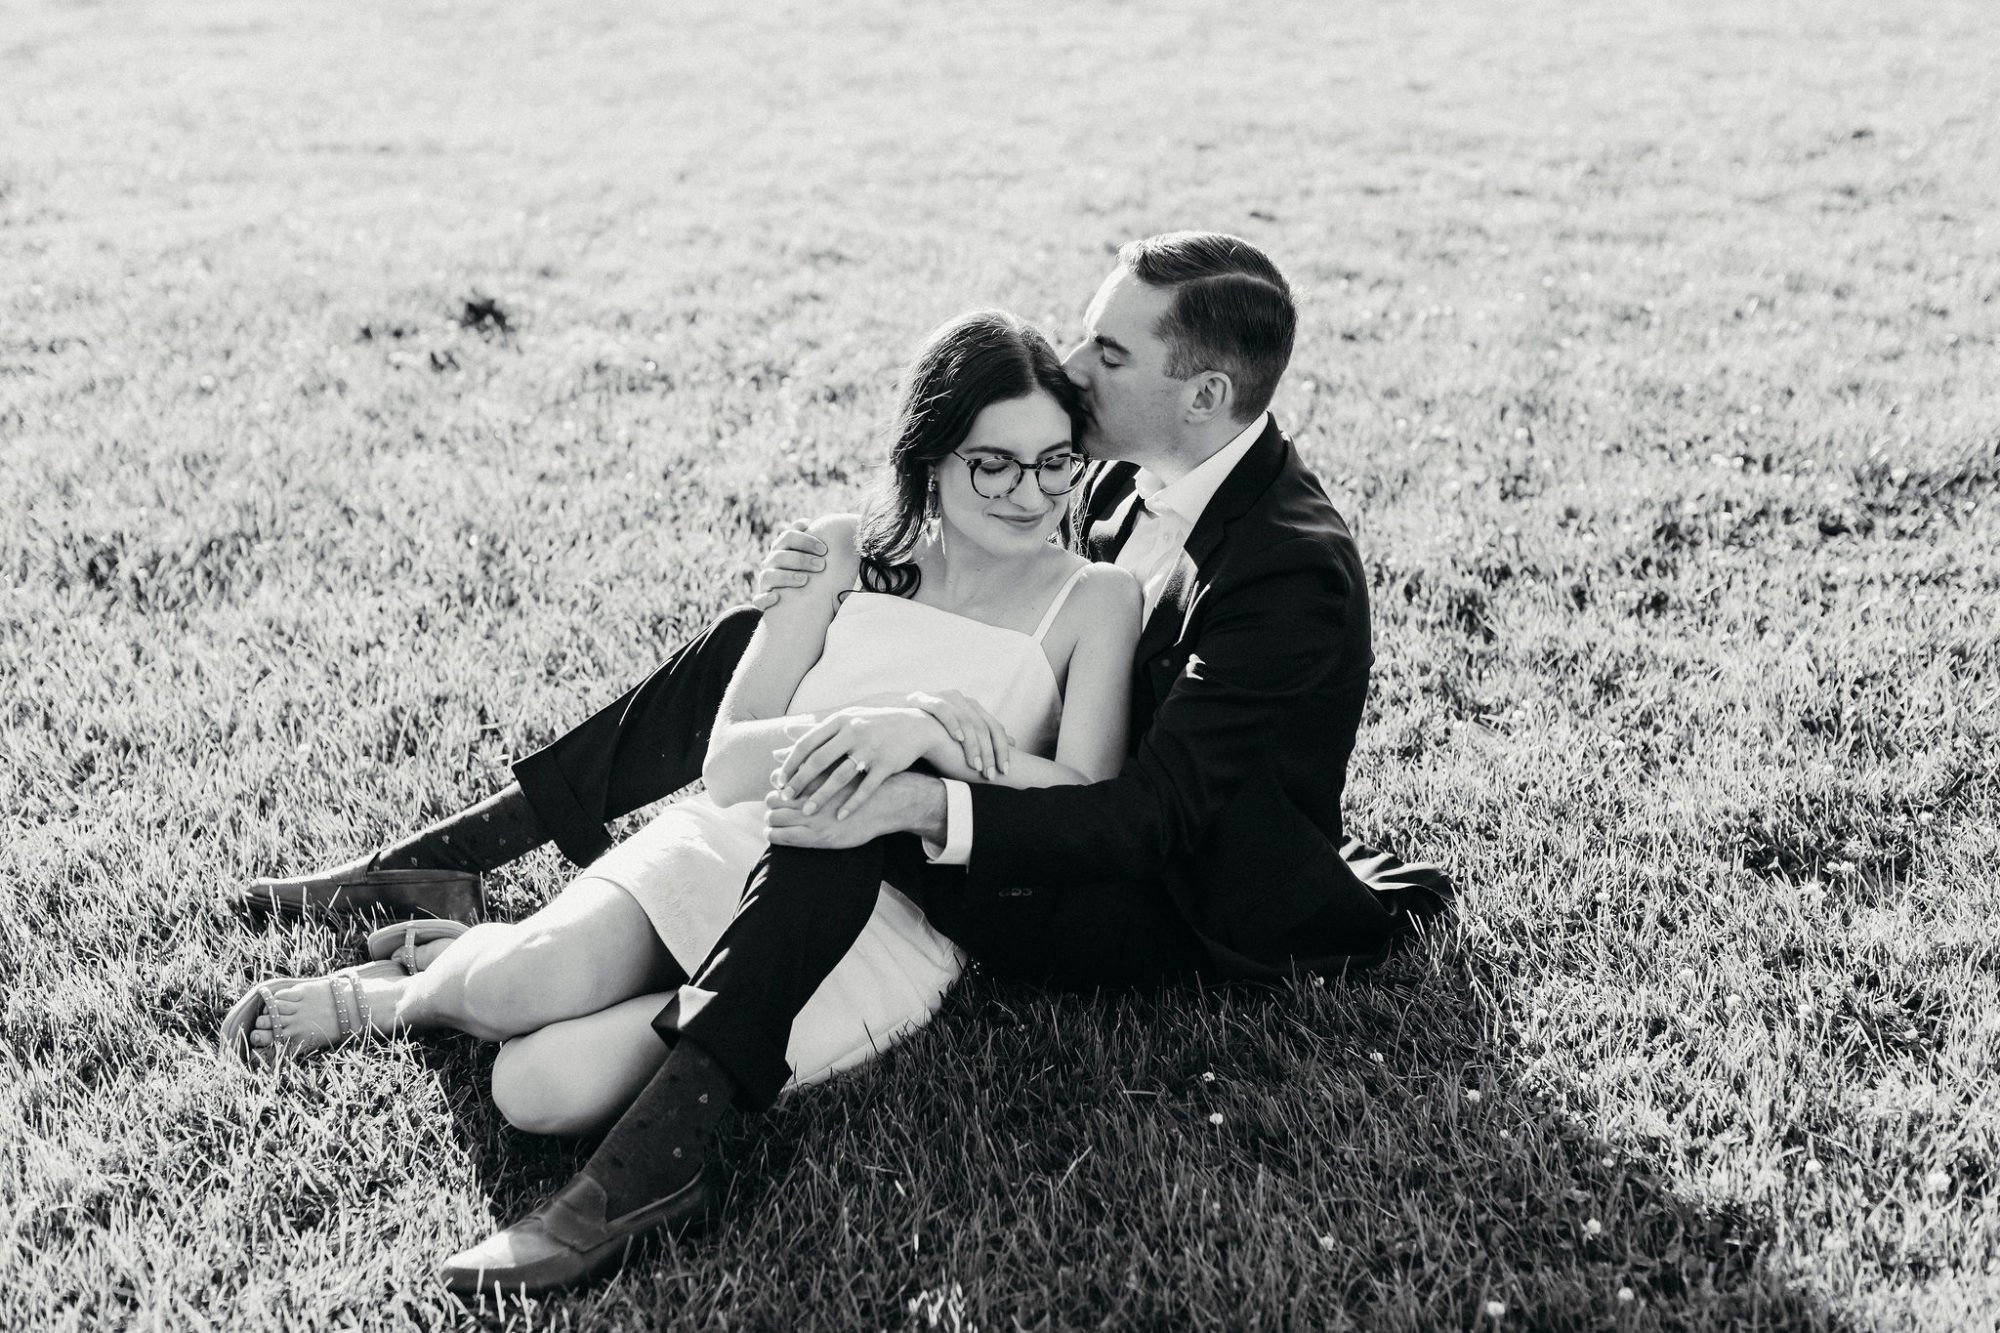 garden engagement photos, engagement photos, garden pictures, couples photos, engagement outfit inspiration, formal engagement outfits, Hudson Valley weddings, hudson valley photographer, catskills wedding photographer,